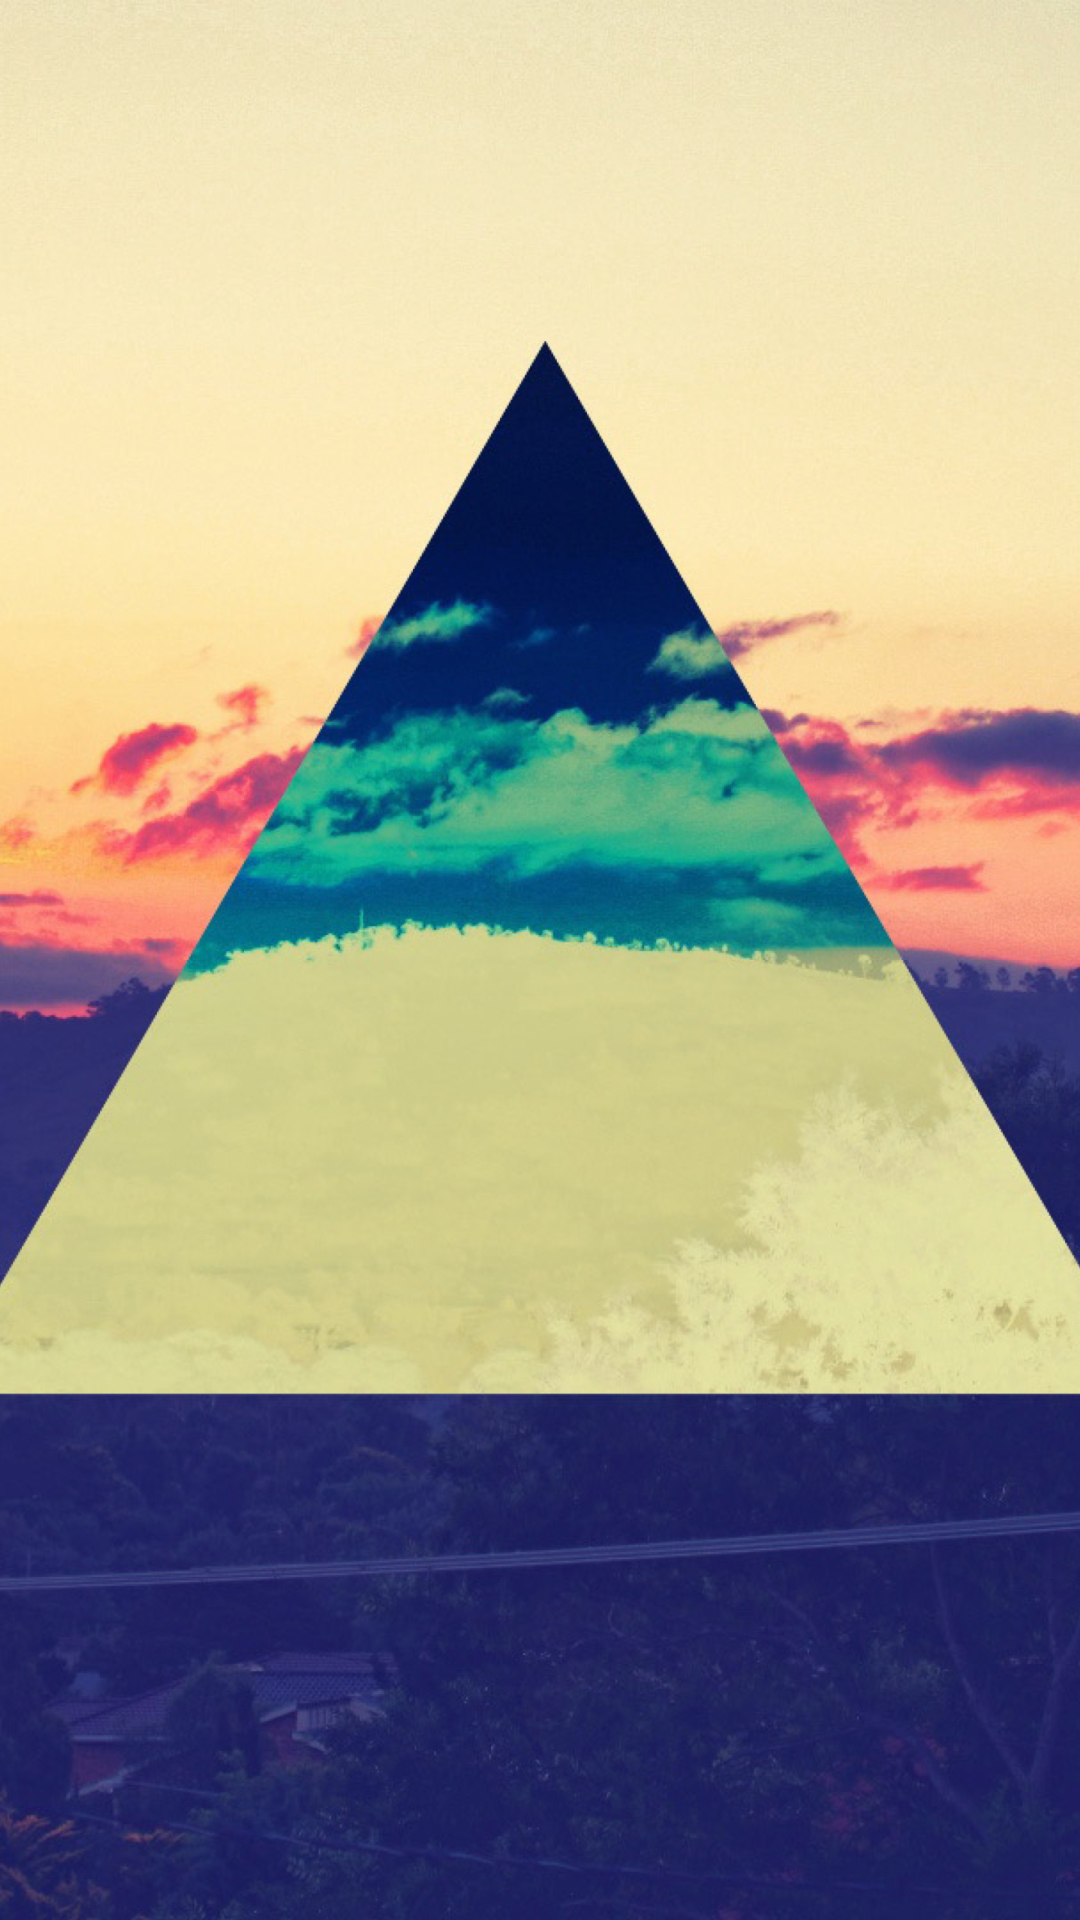 Das Sunset Inverted Colour Triangle Wallpaper 1080x1920